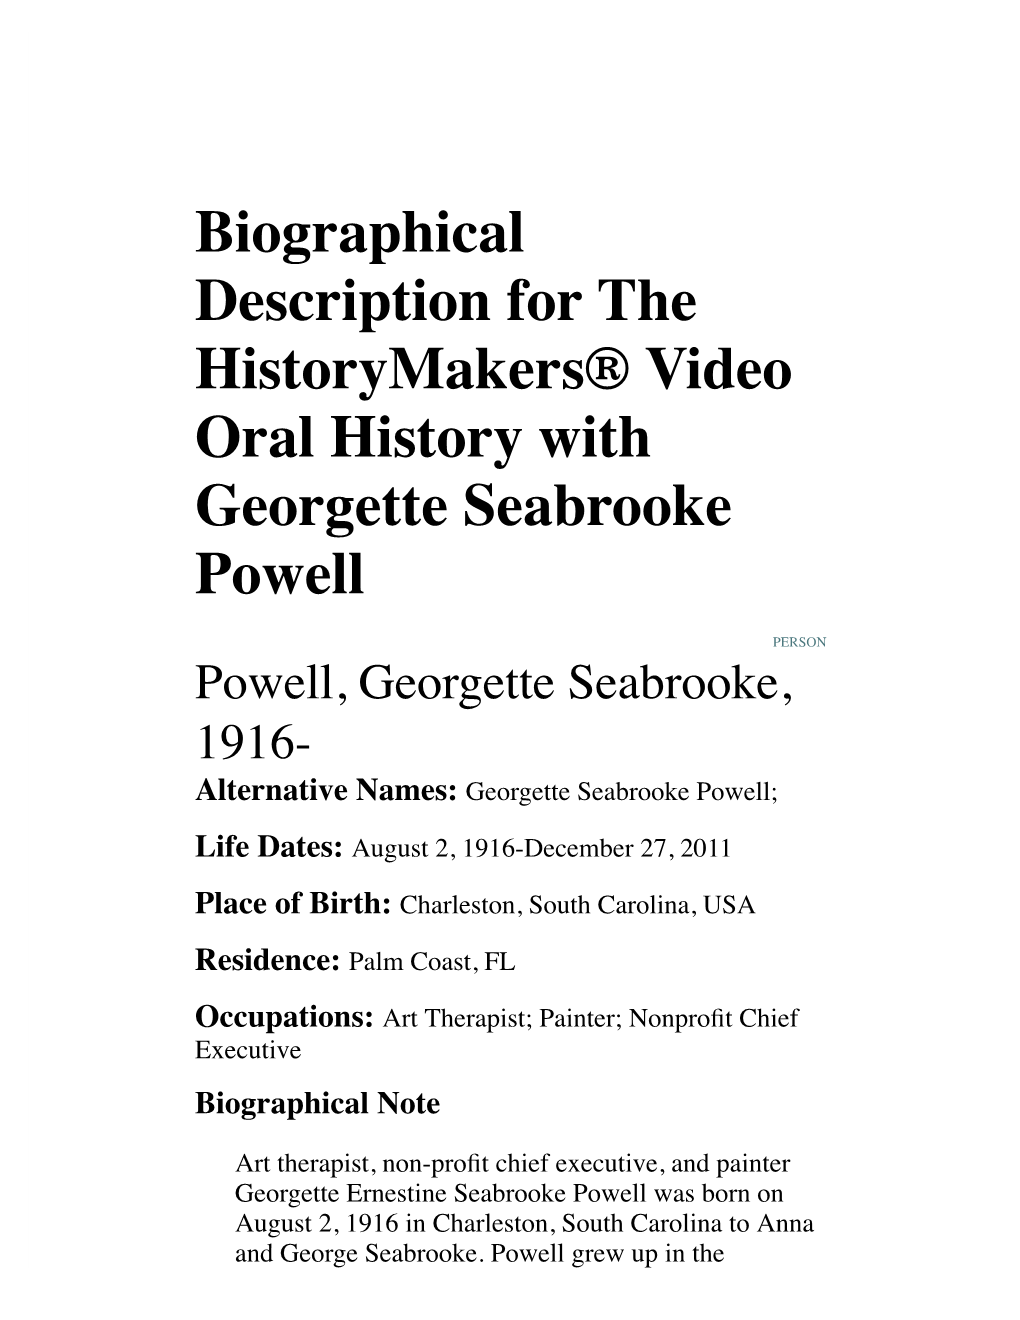 Biographical Description for the Historymakers® Video Oral History with Georgette Seabrooke Powell